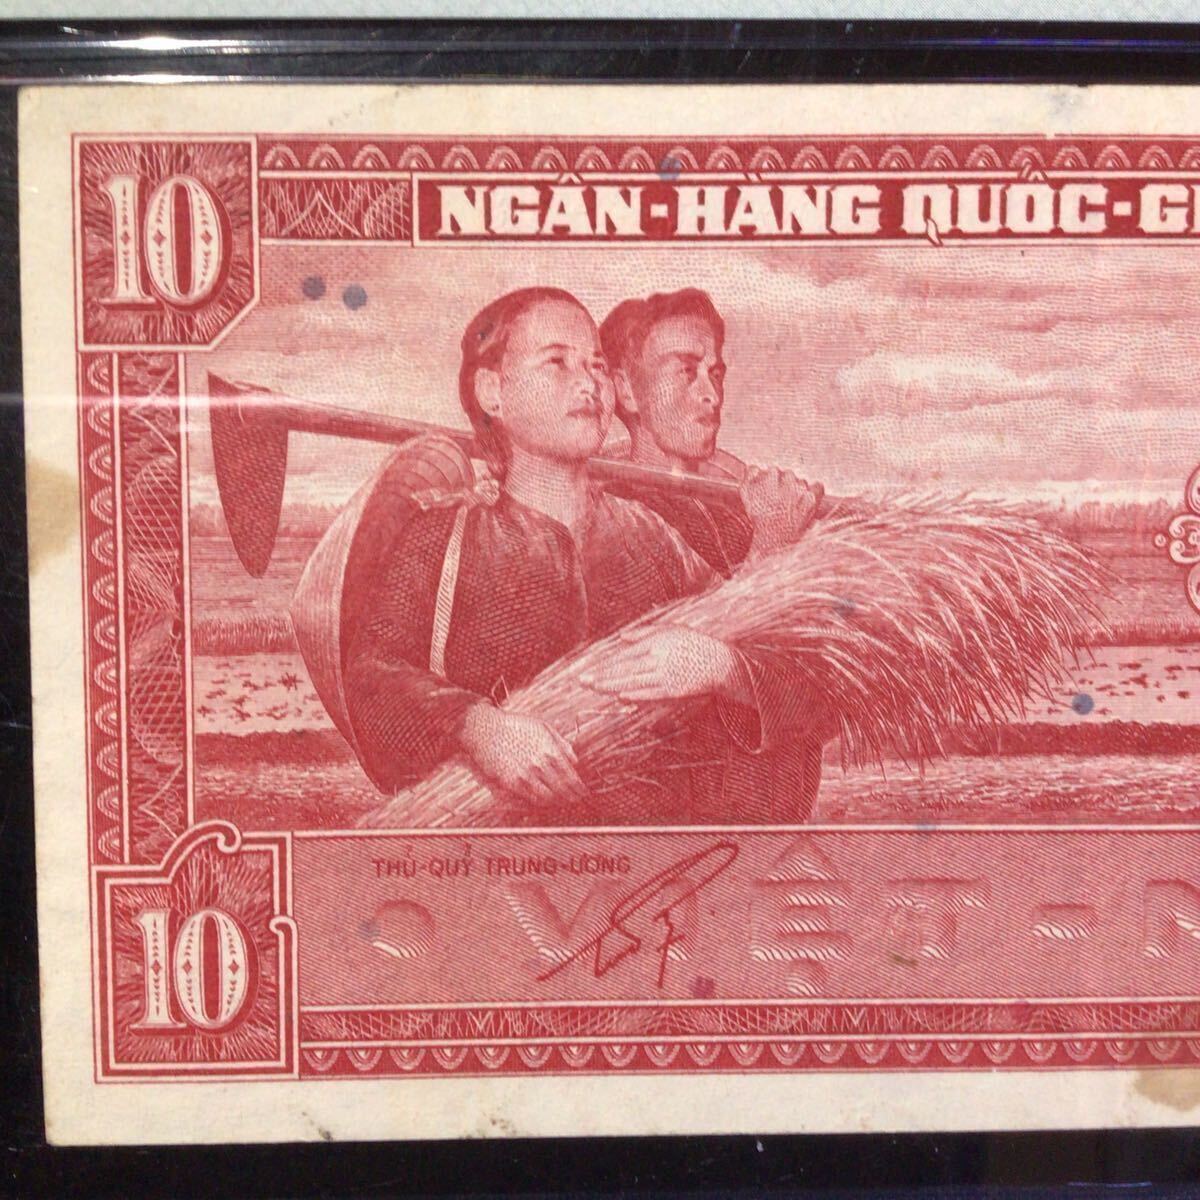 World Banknote Grading SOUTH VIET NAM《National Bank》10 Dong【1962】『PMG Grading Choice Very Fine 35』_画像3